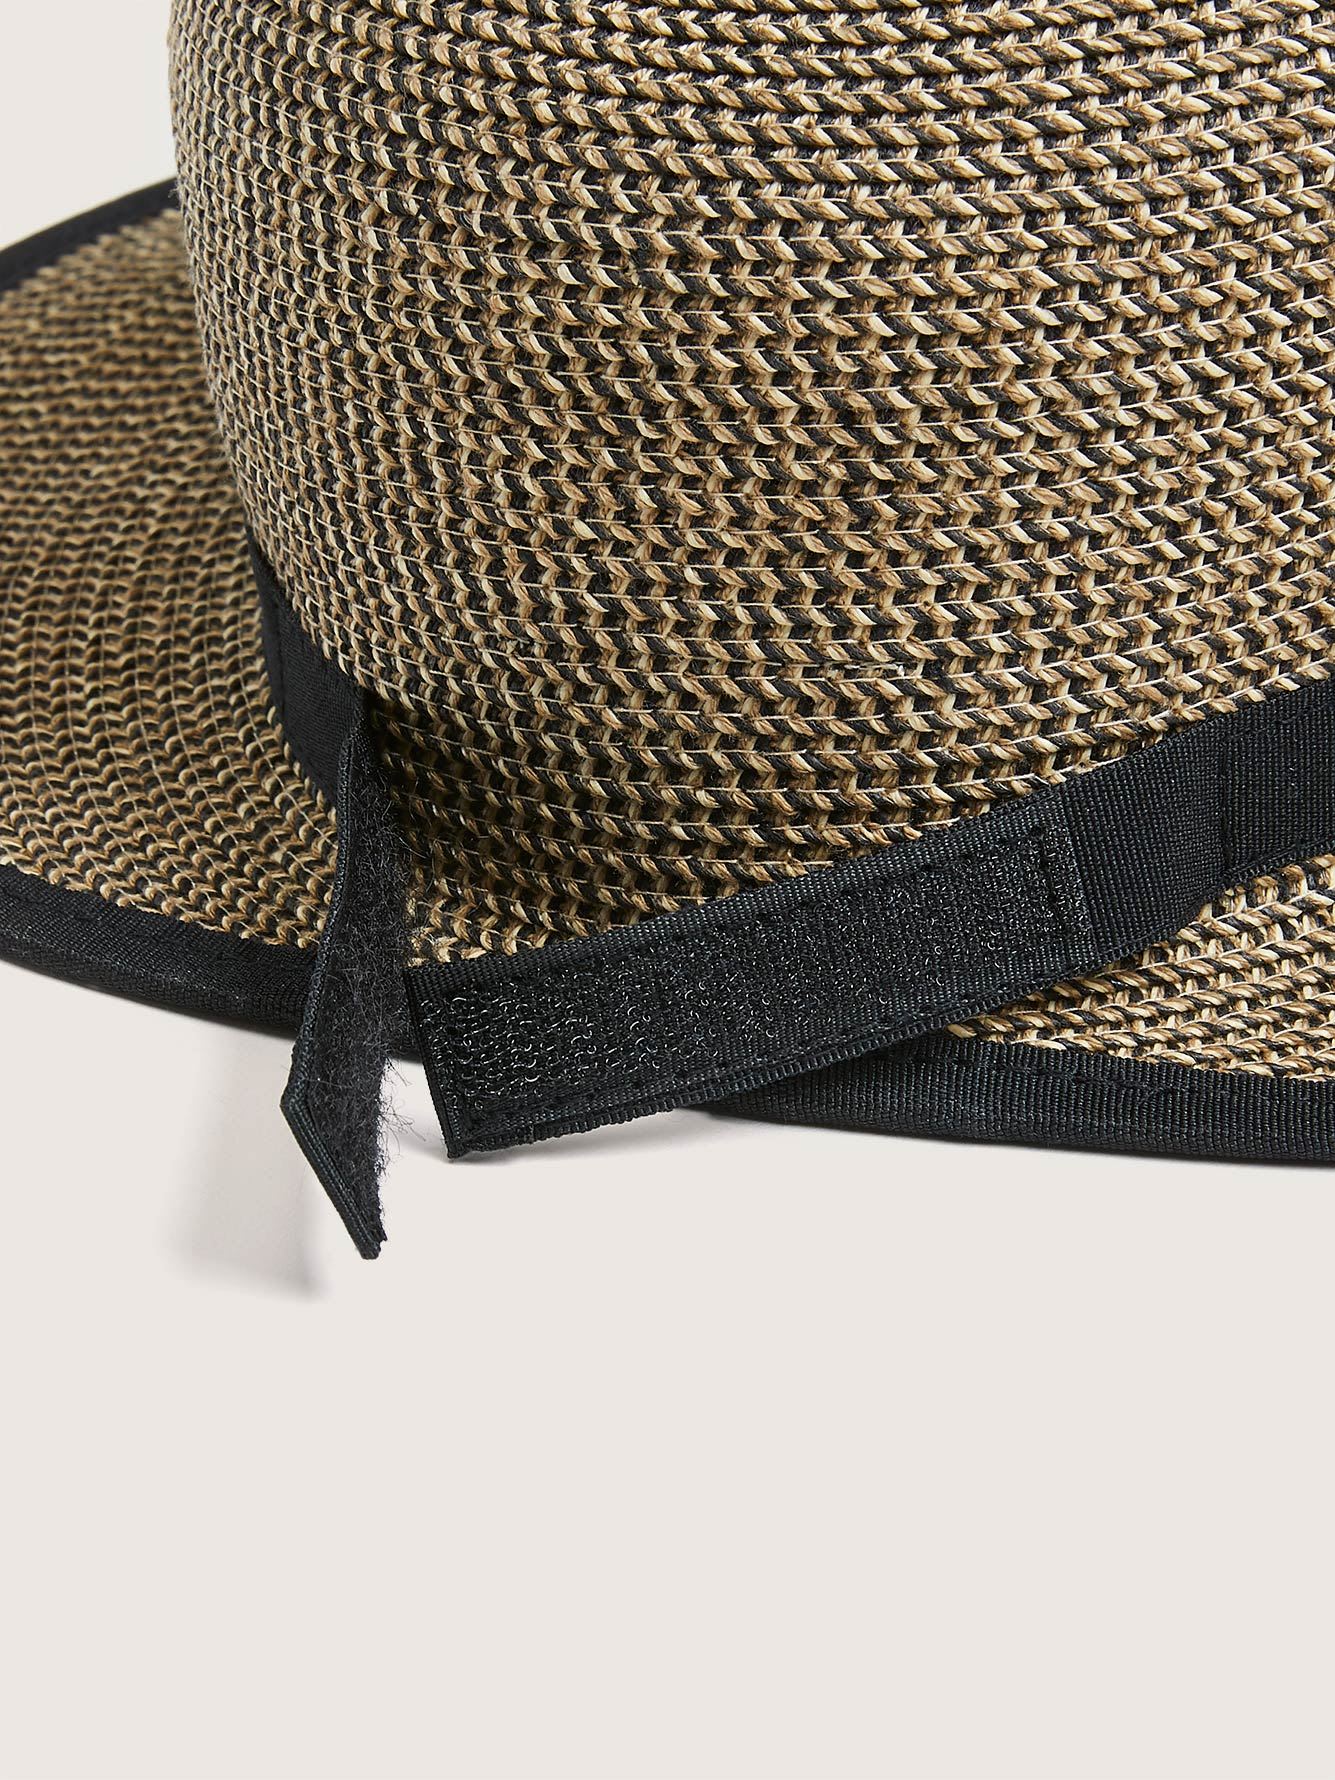 Two Tone Straw Hat - Canadian Hat